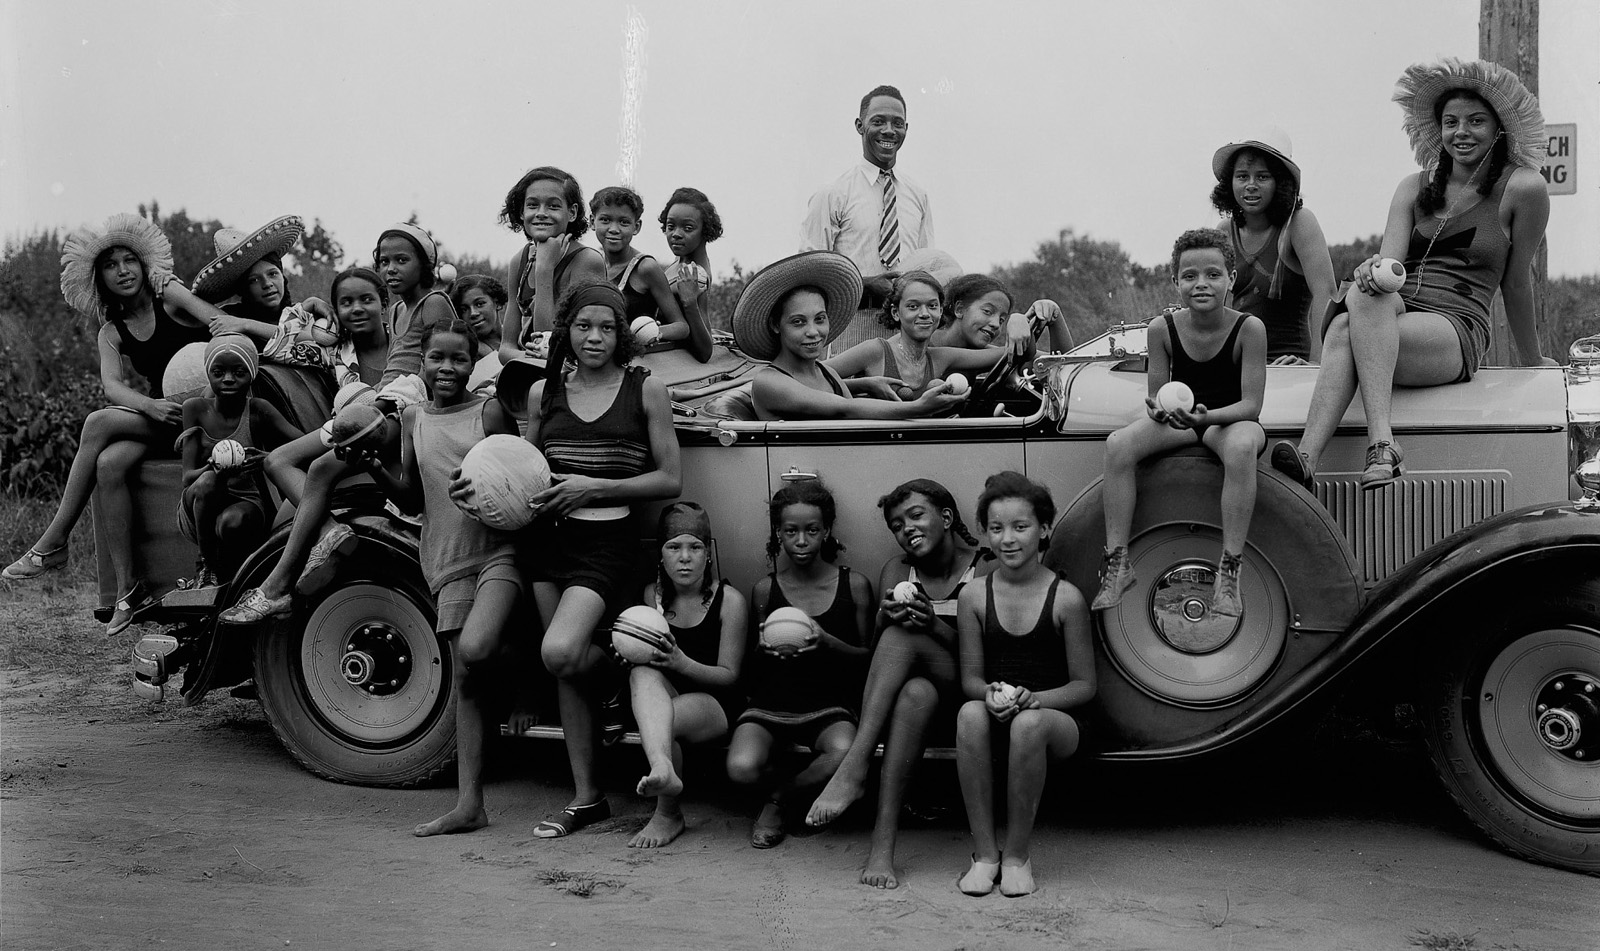 Twenty-two individuals pose for a photo sitting on or standing around a vehicle. The image is in black and white and was taken in 1931 at a YMCA camp.